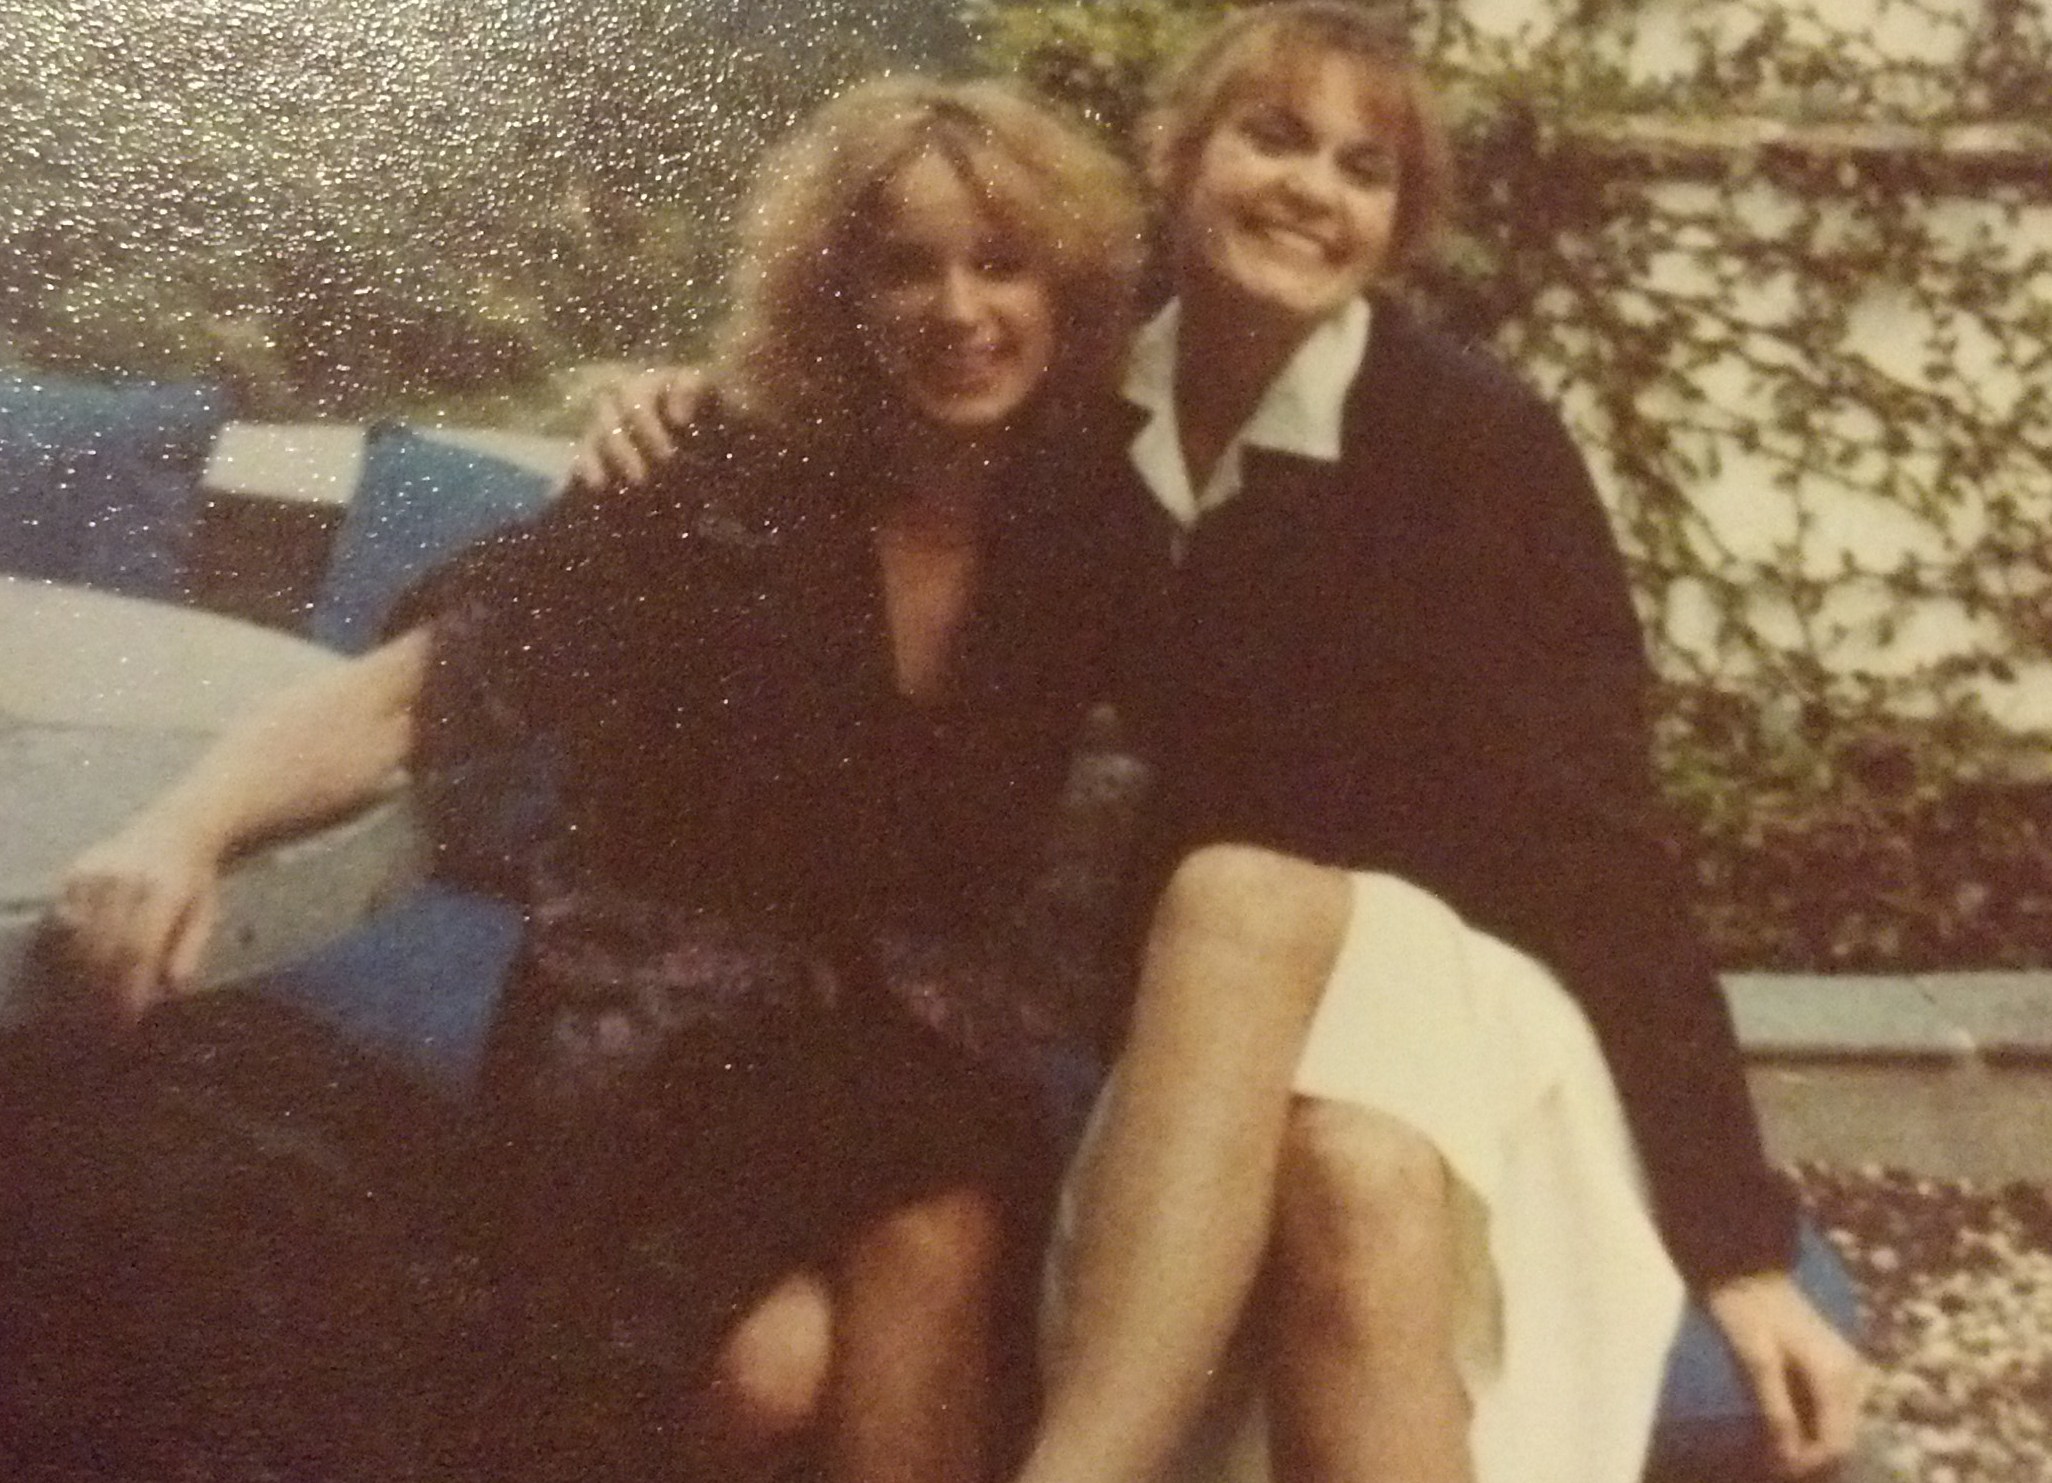 Sharon with friend 1969 Hollywood Hills